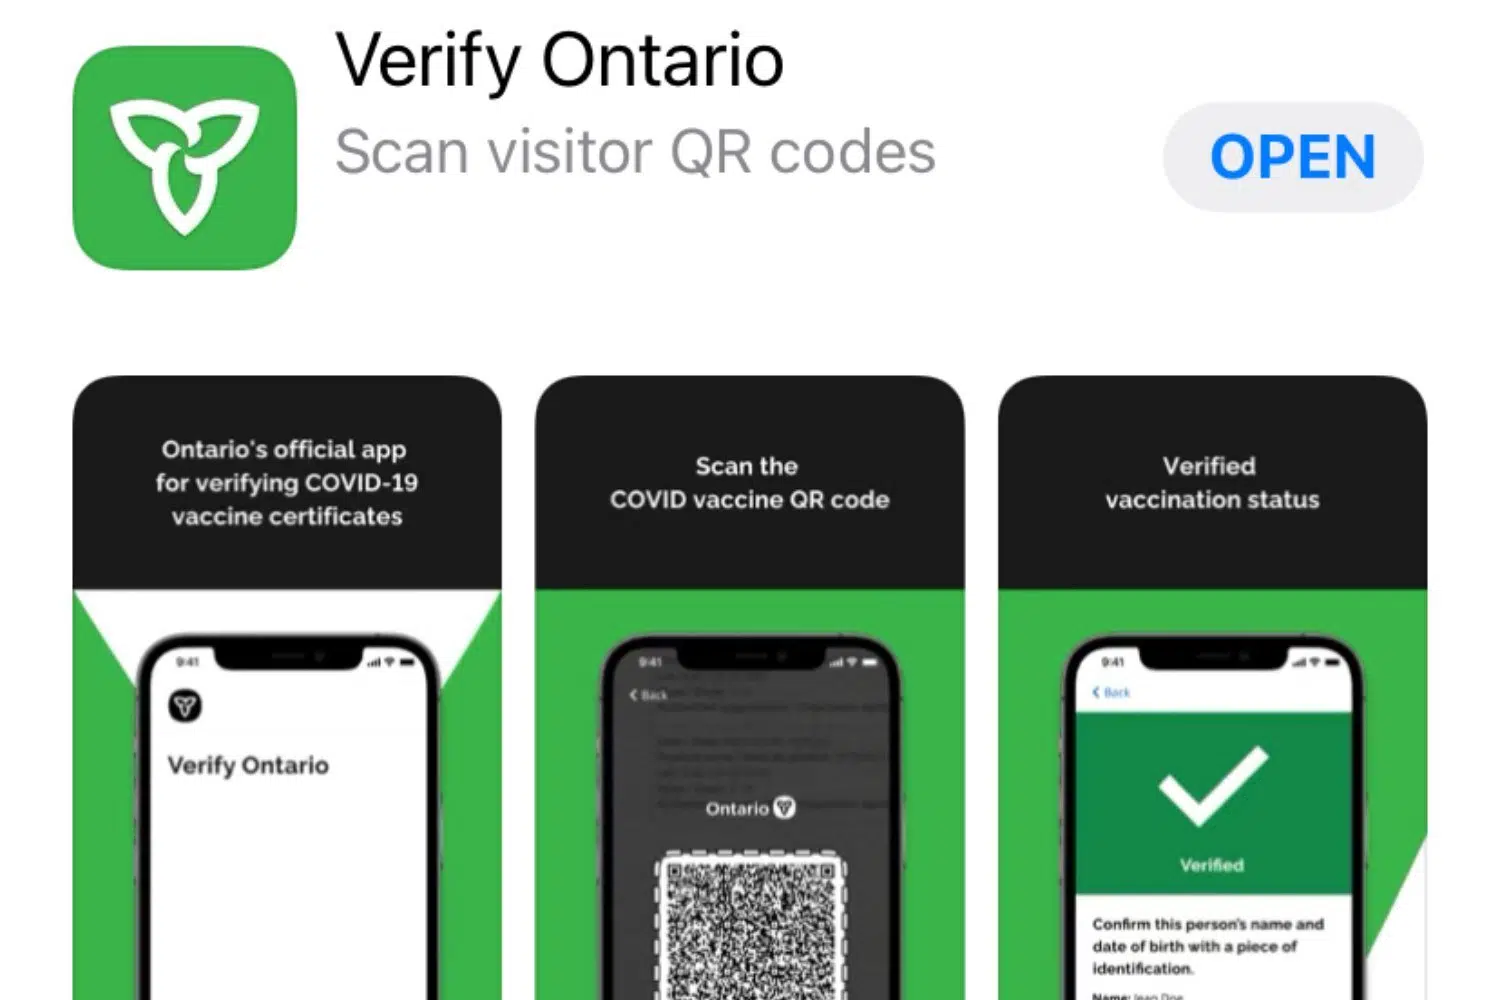 Enhanced COVID-19 Vaccine Certificate with QR Code and Verify Ontario App Available for Download Starting October 15